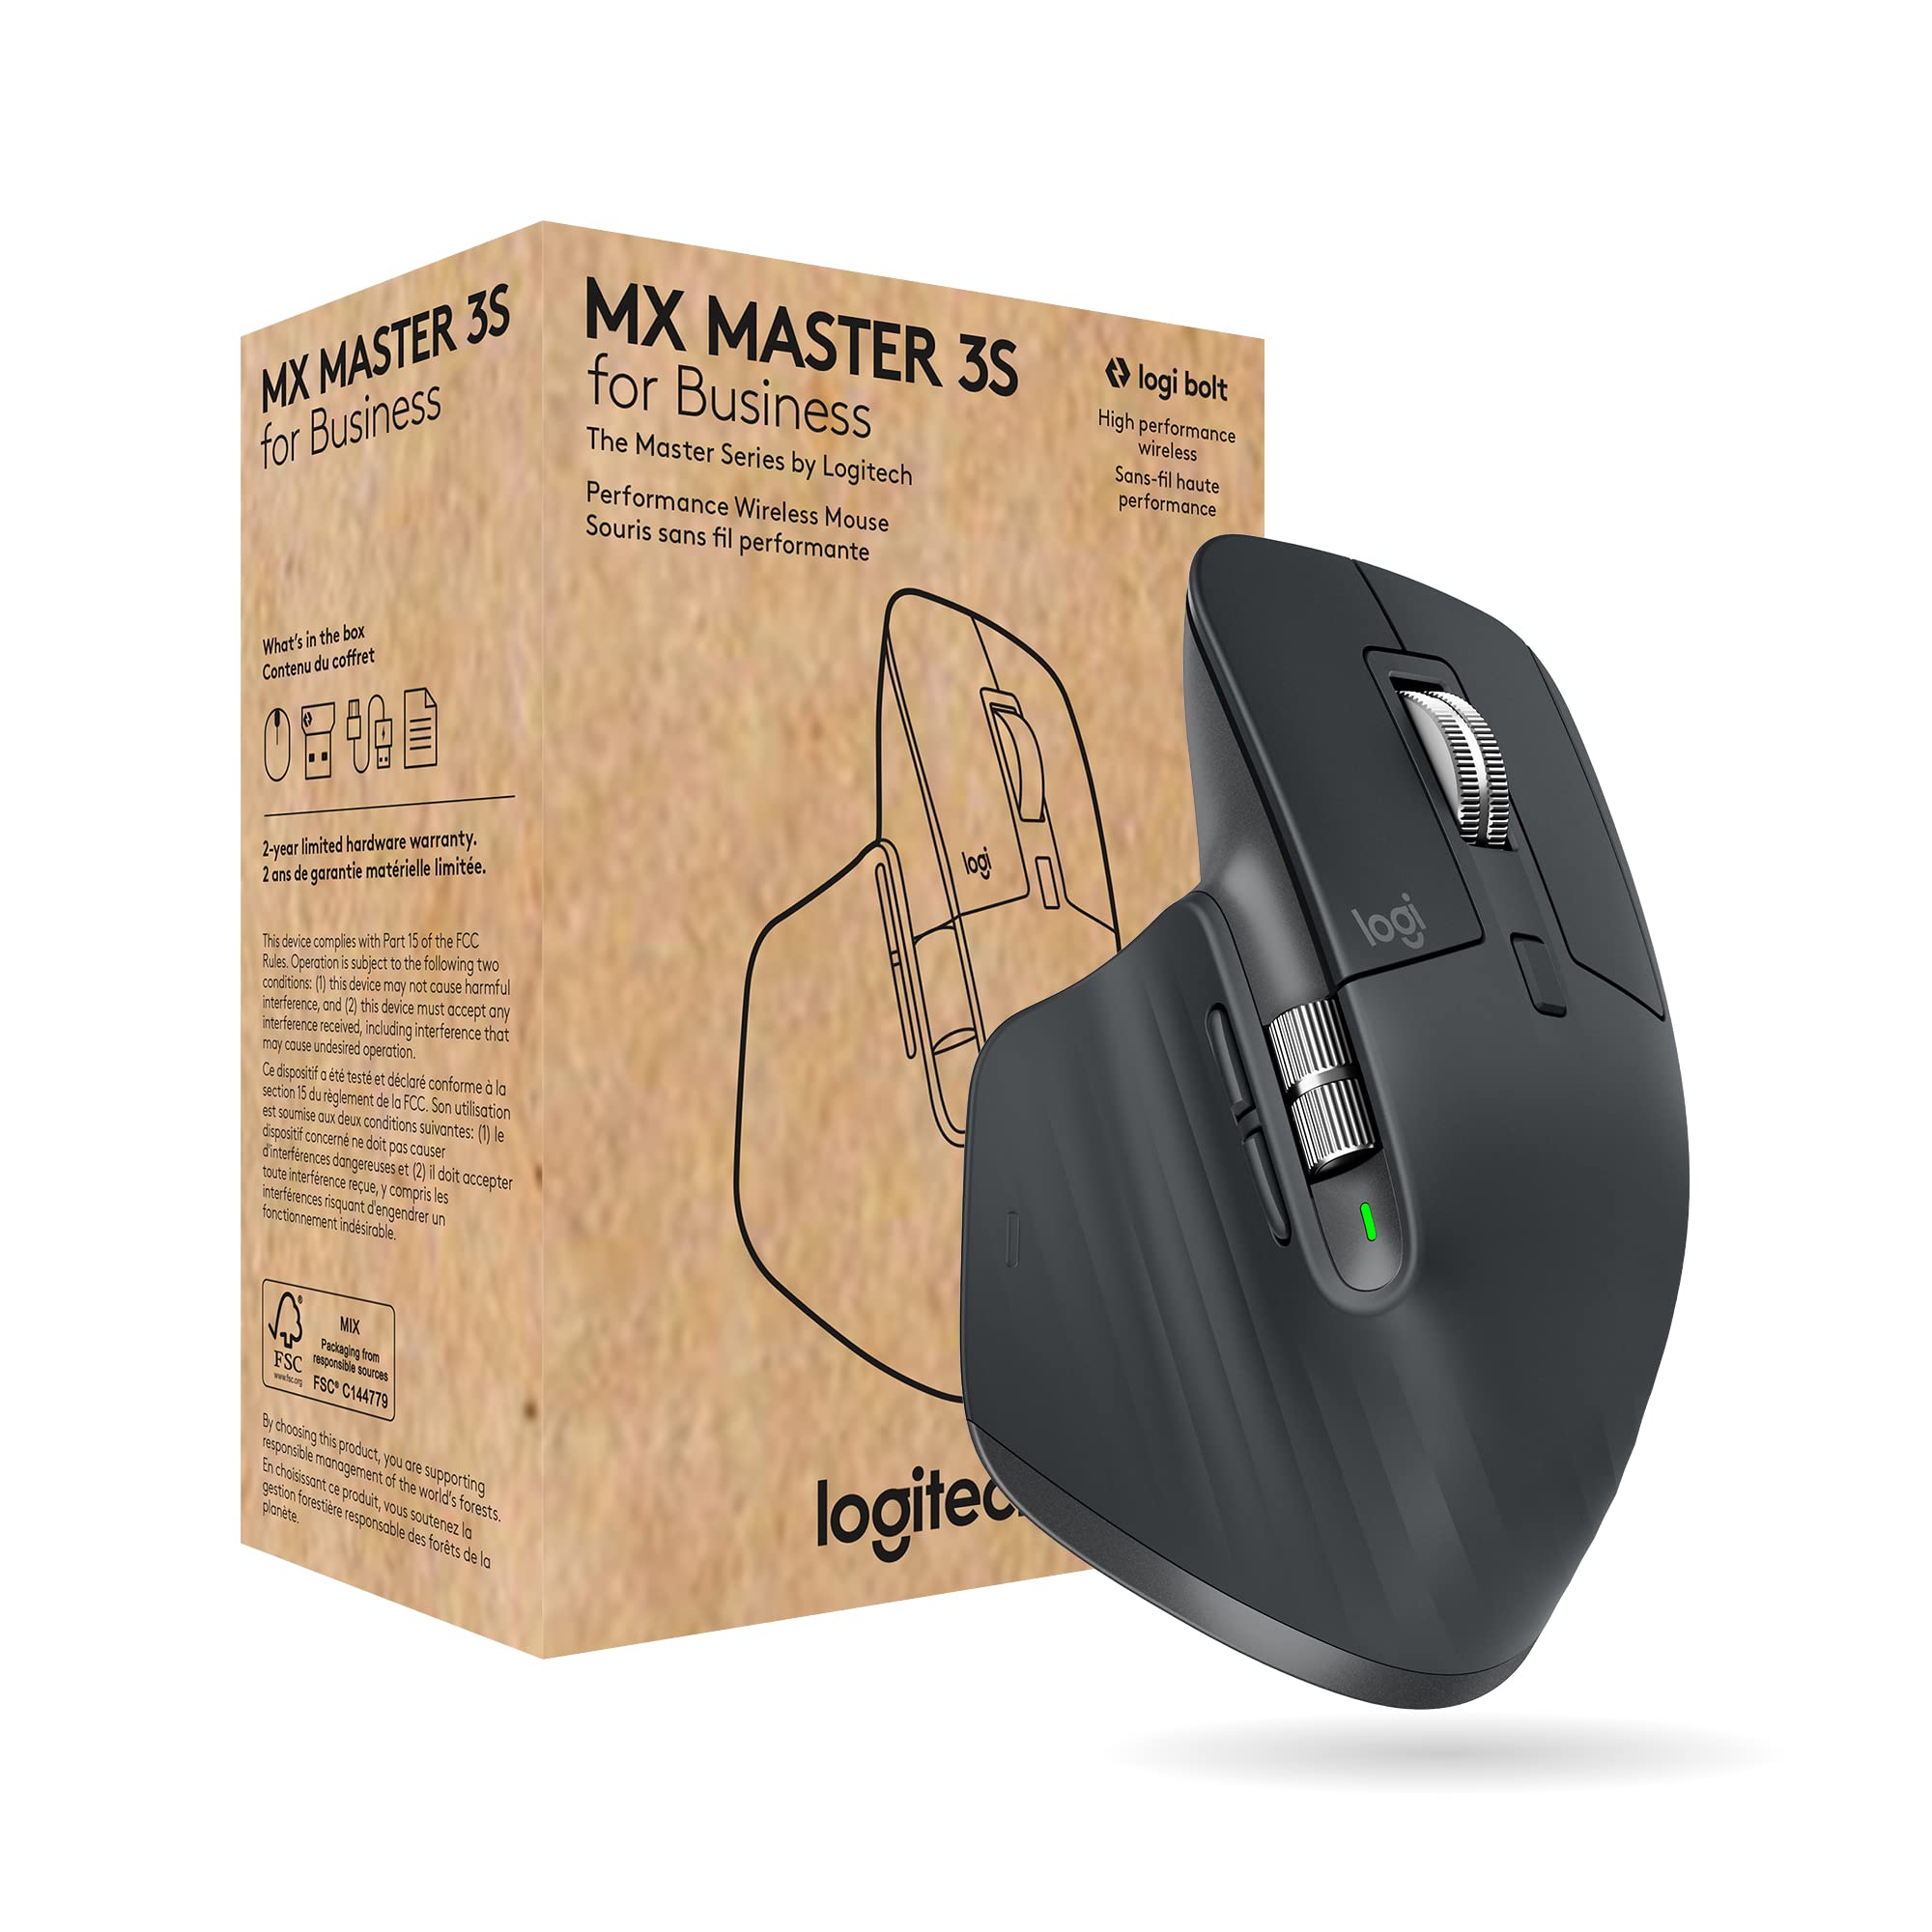 MX MASTER 3S FOR BUSINESS -